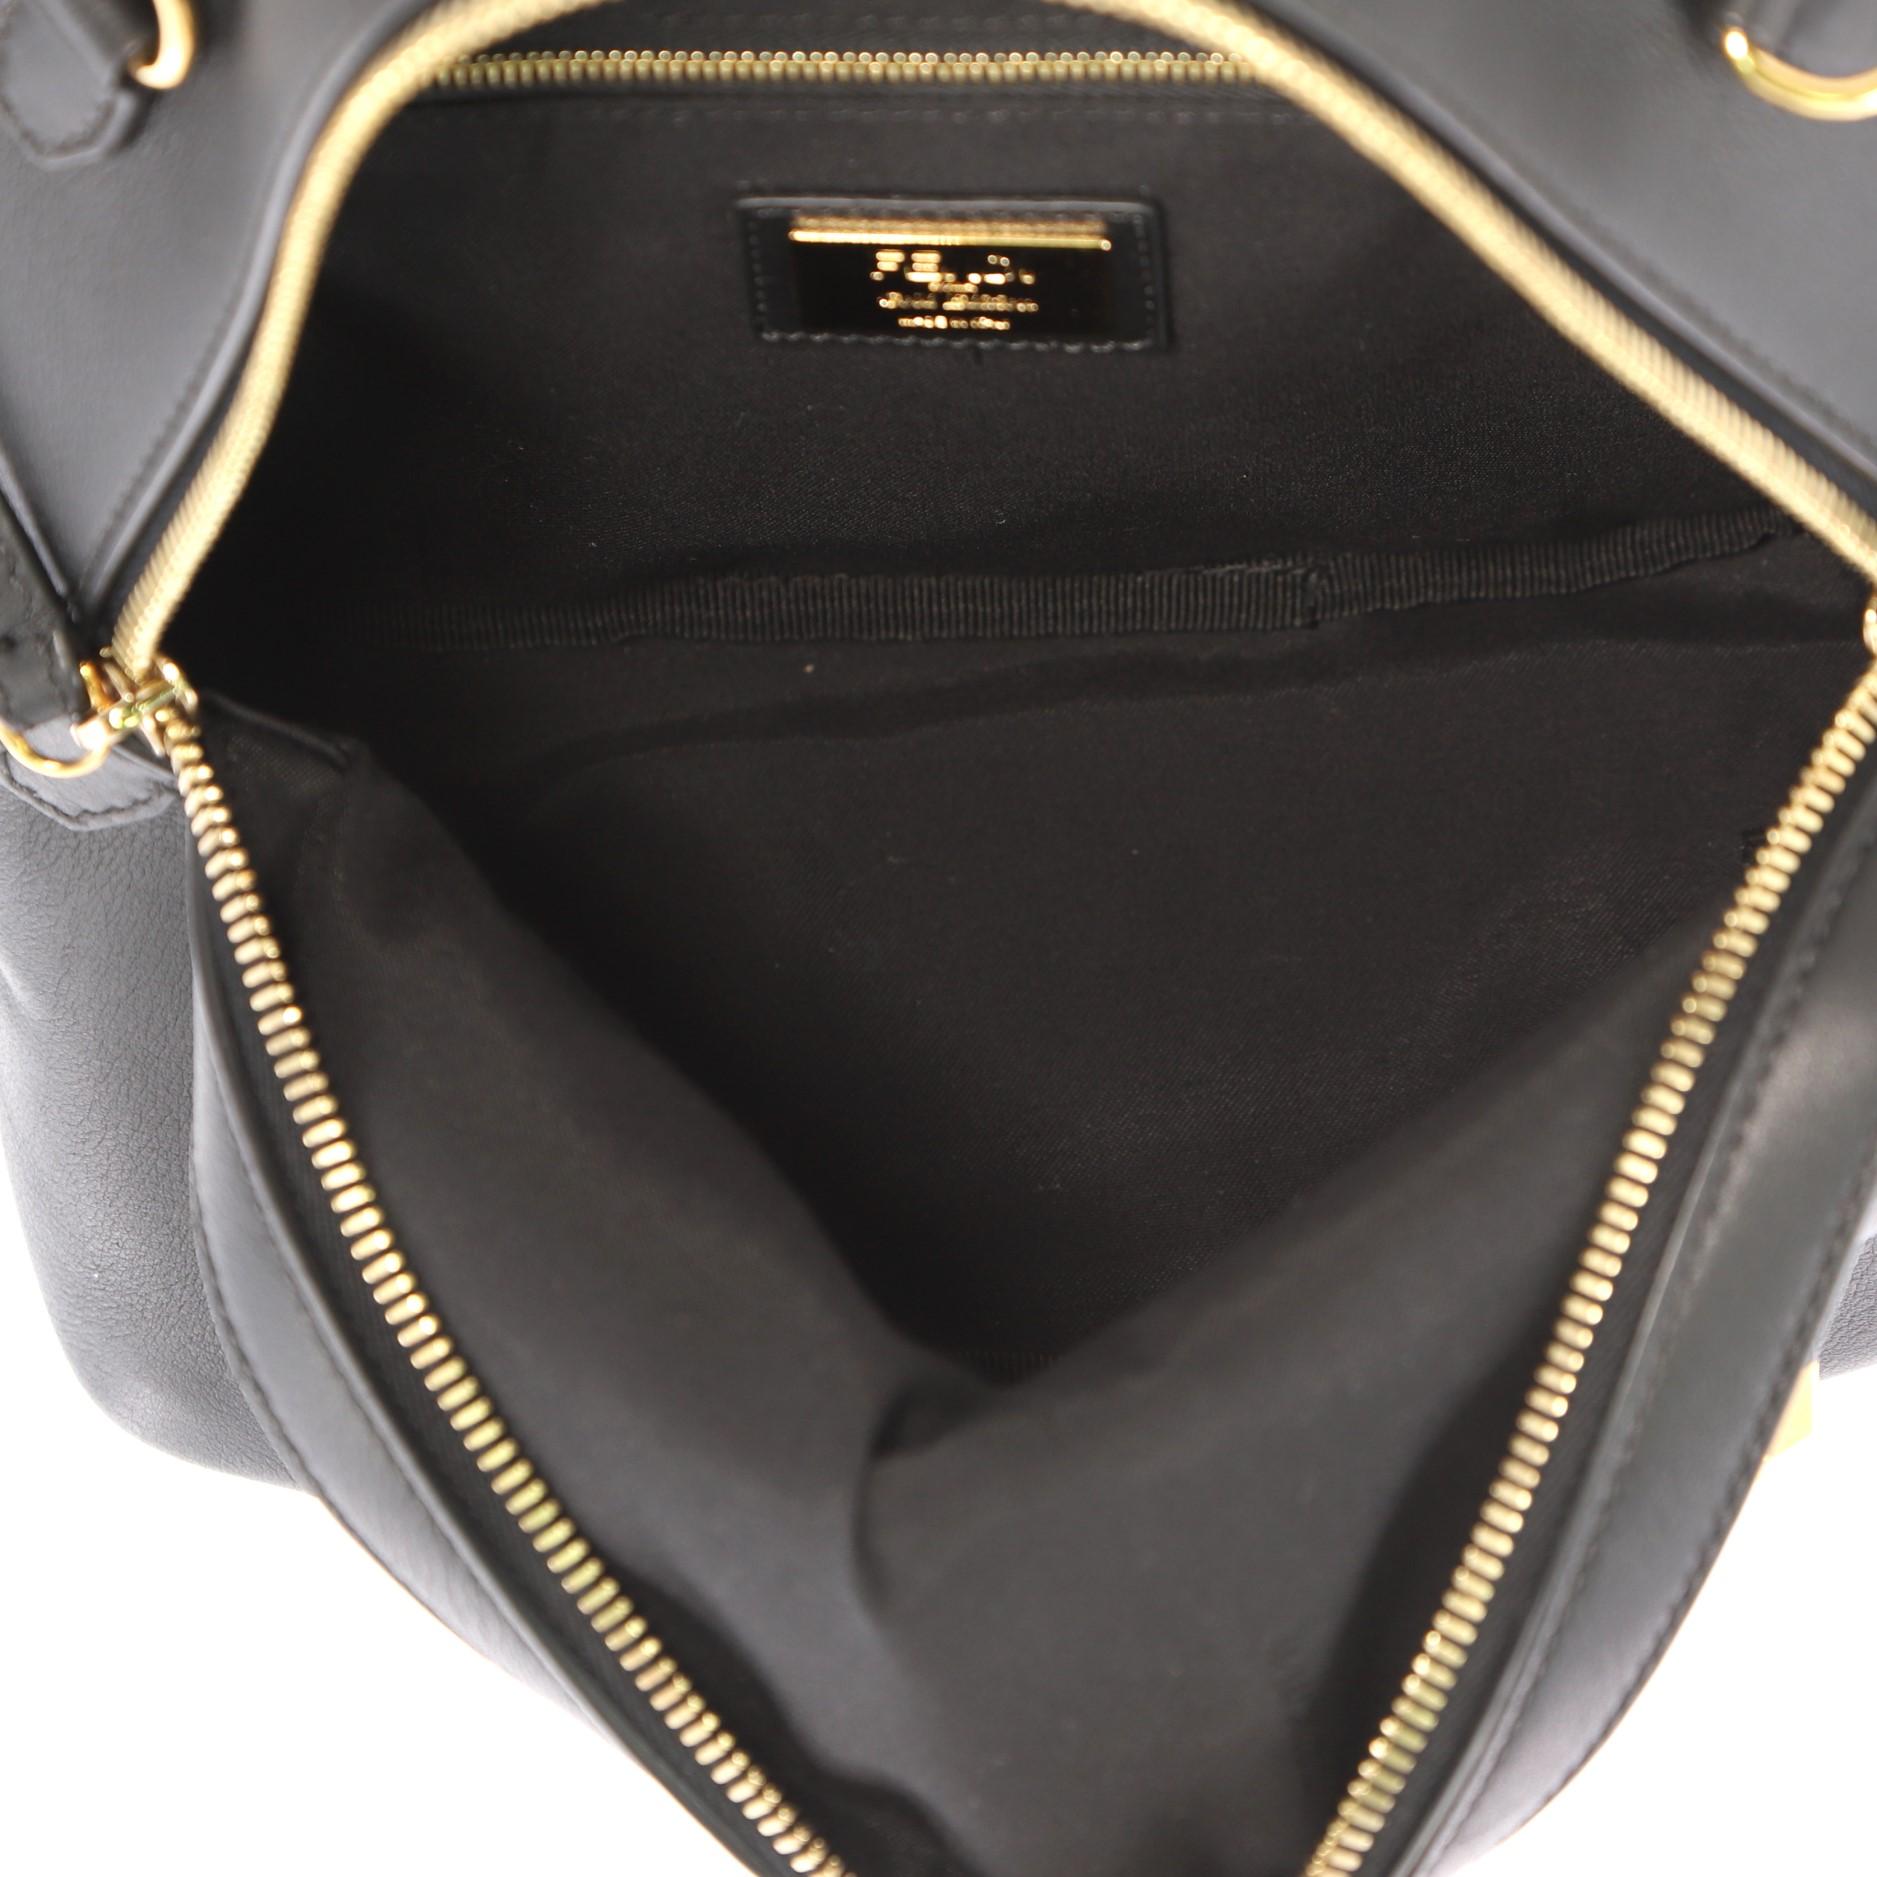  Fendi By The Way Backpack Crossbody Studded Leather Mini  1